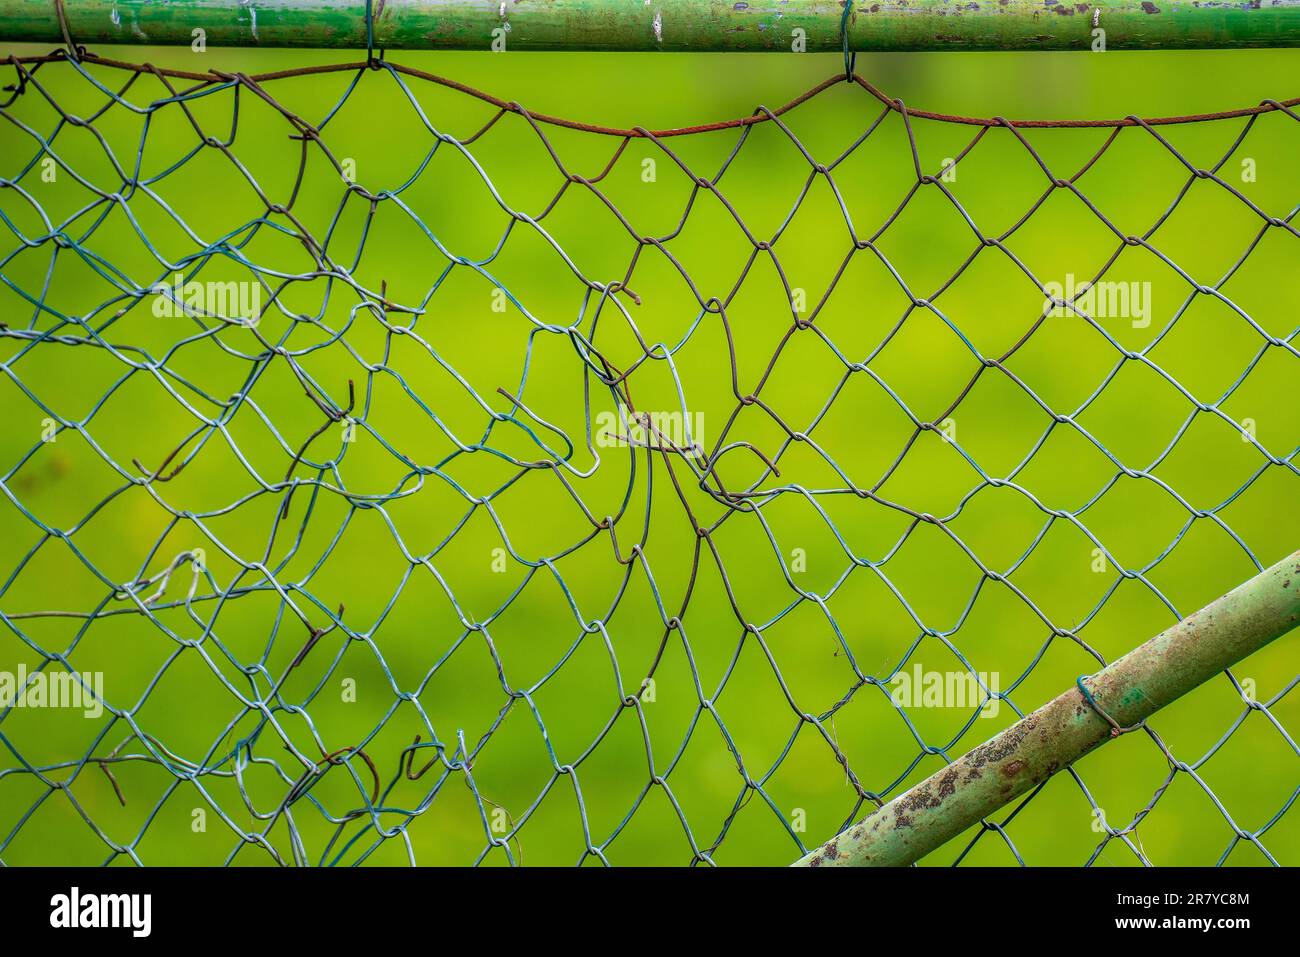 Broken mesh wire fence in the field Stock Photo